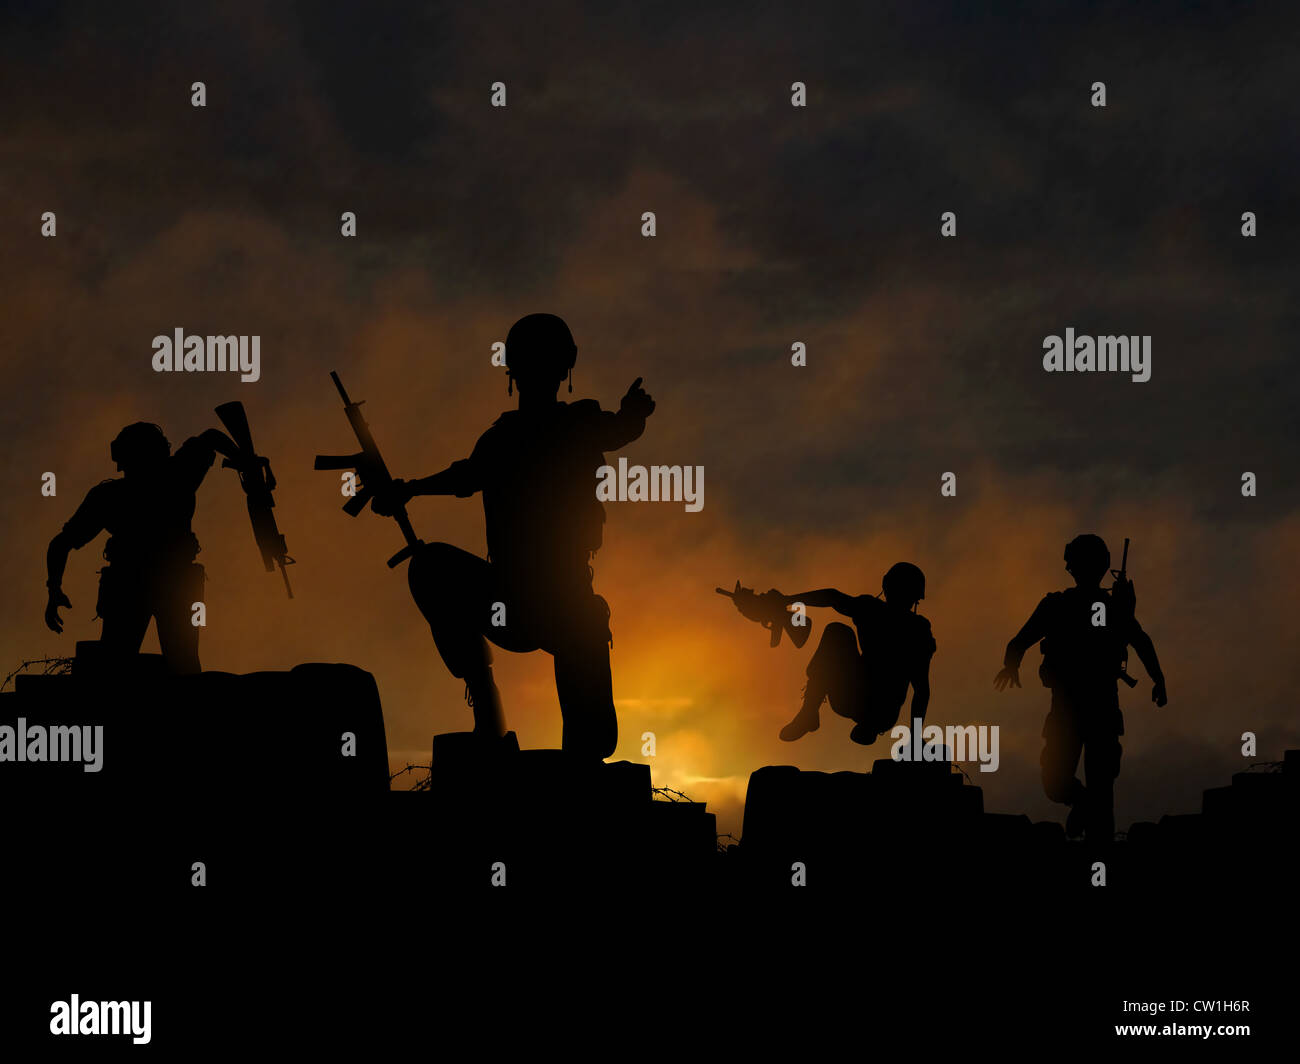 Dramatic illustration of soldiers advancing at dawn or dusk Stock Photo